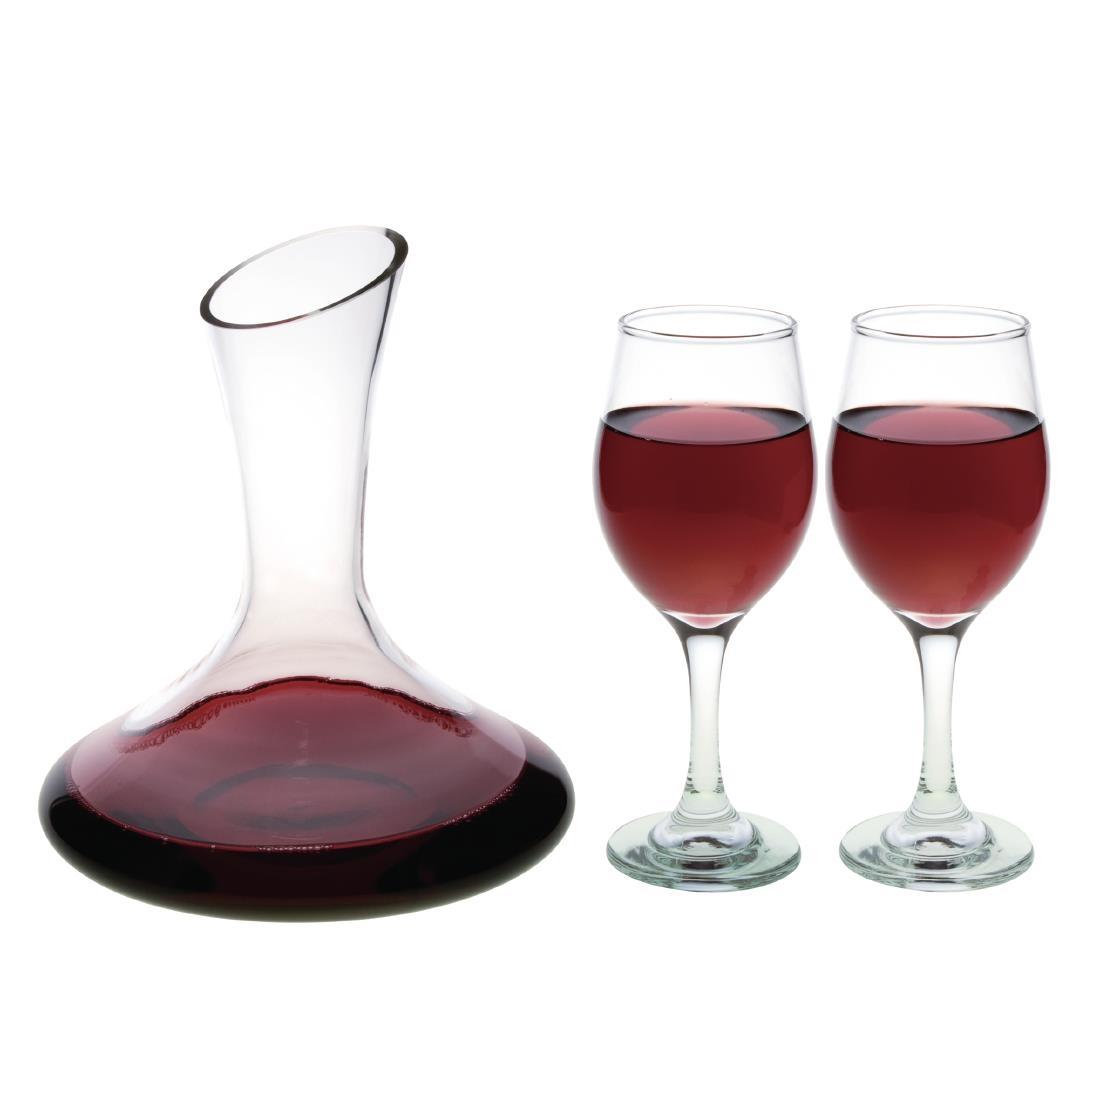 Olympia Curved Glass Decanter 750ml - CN609  - 3